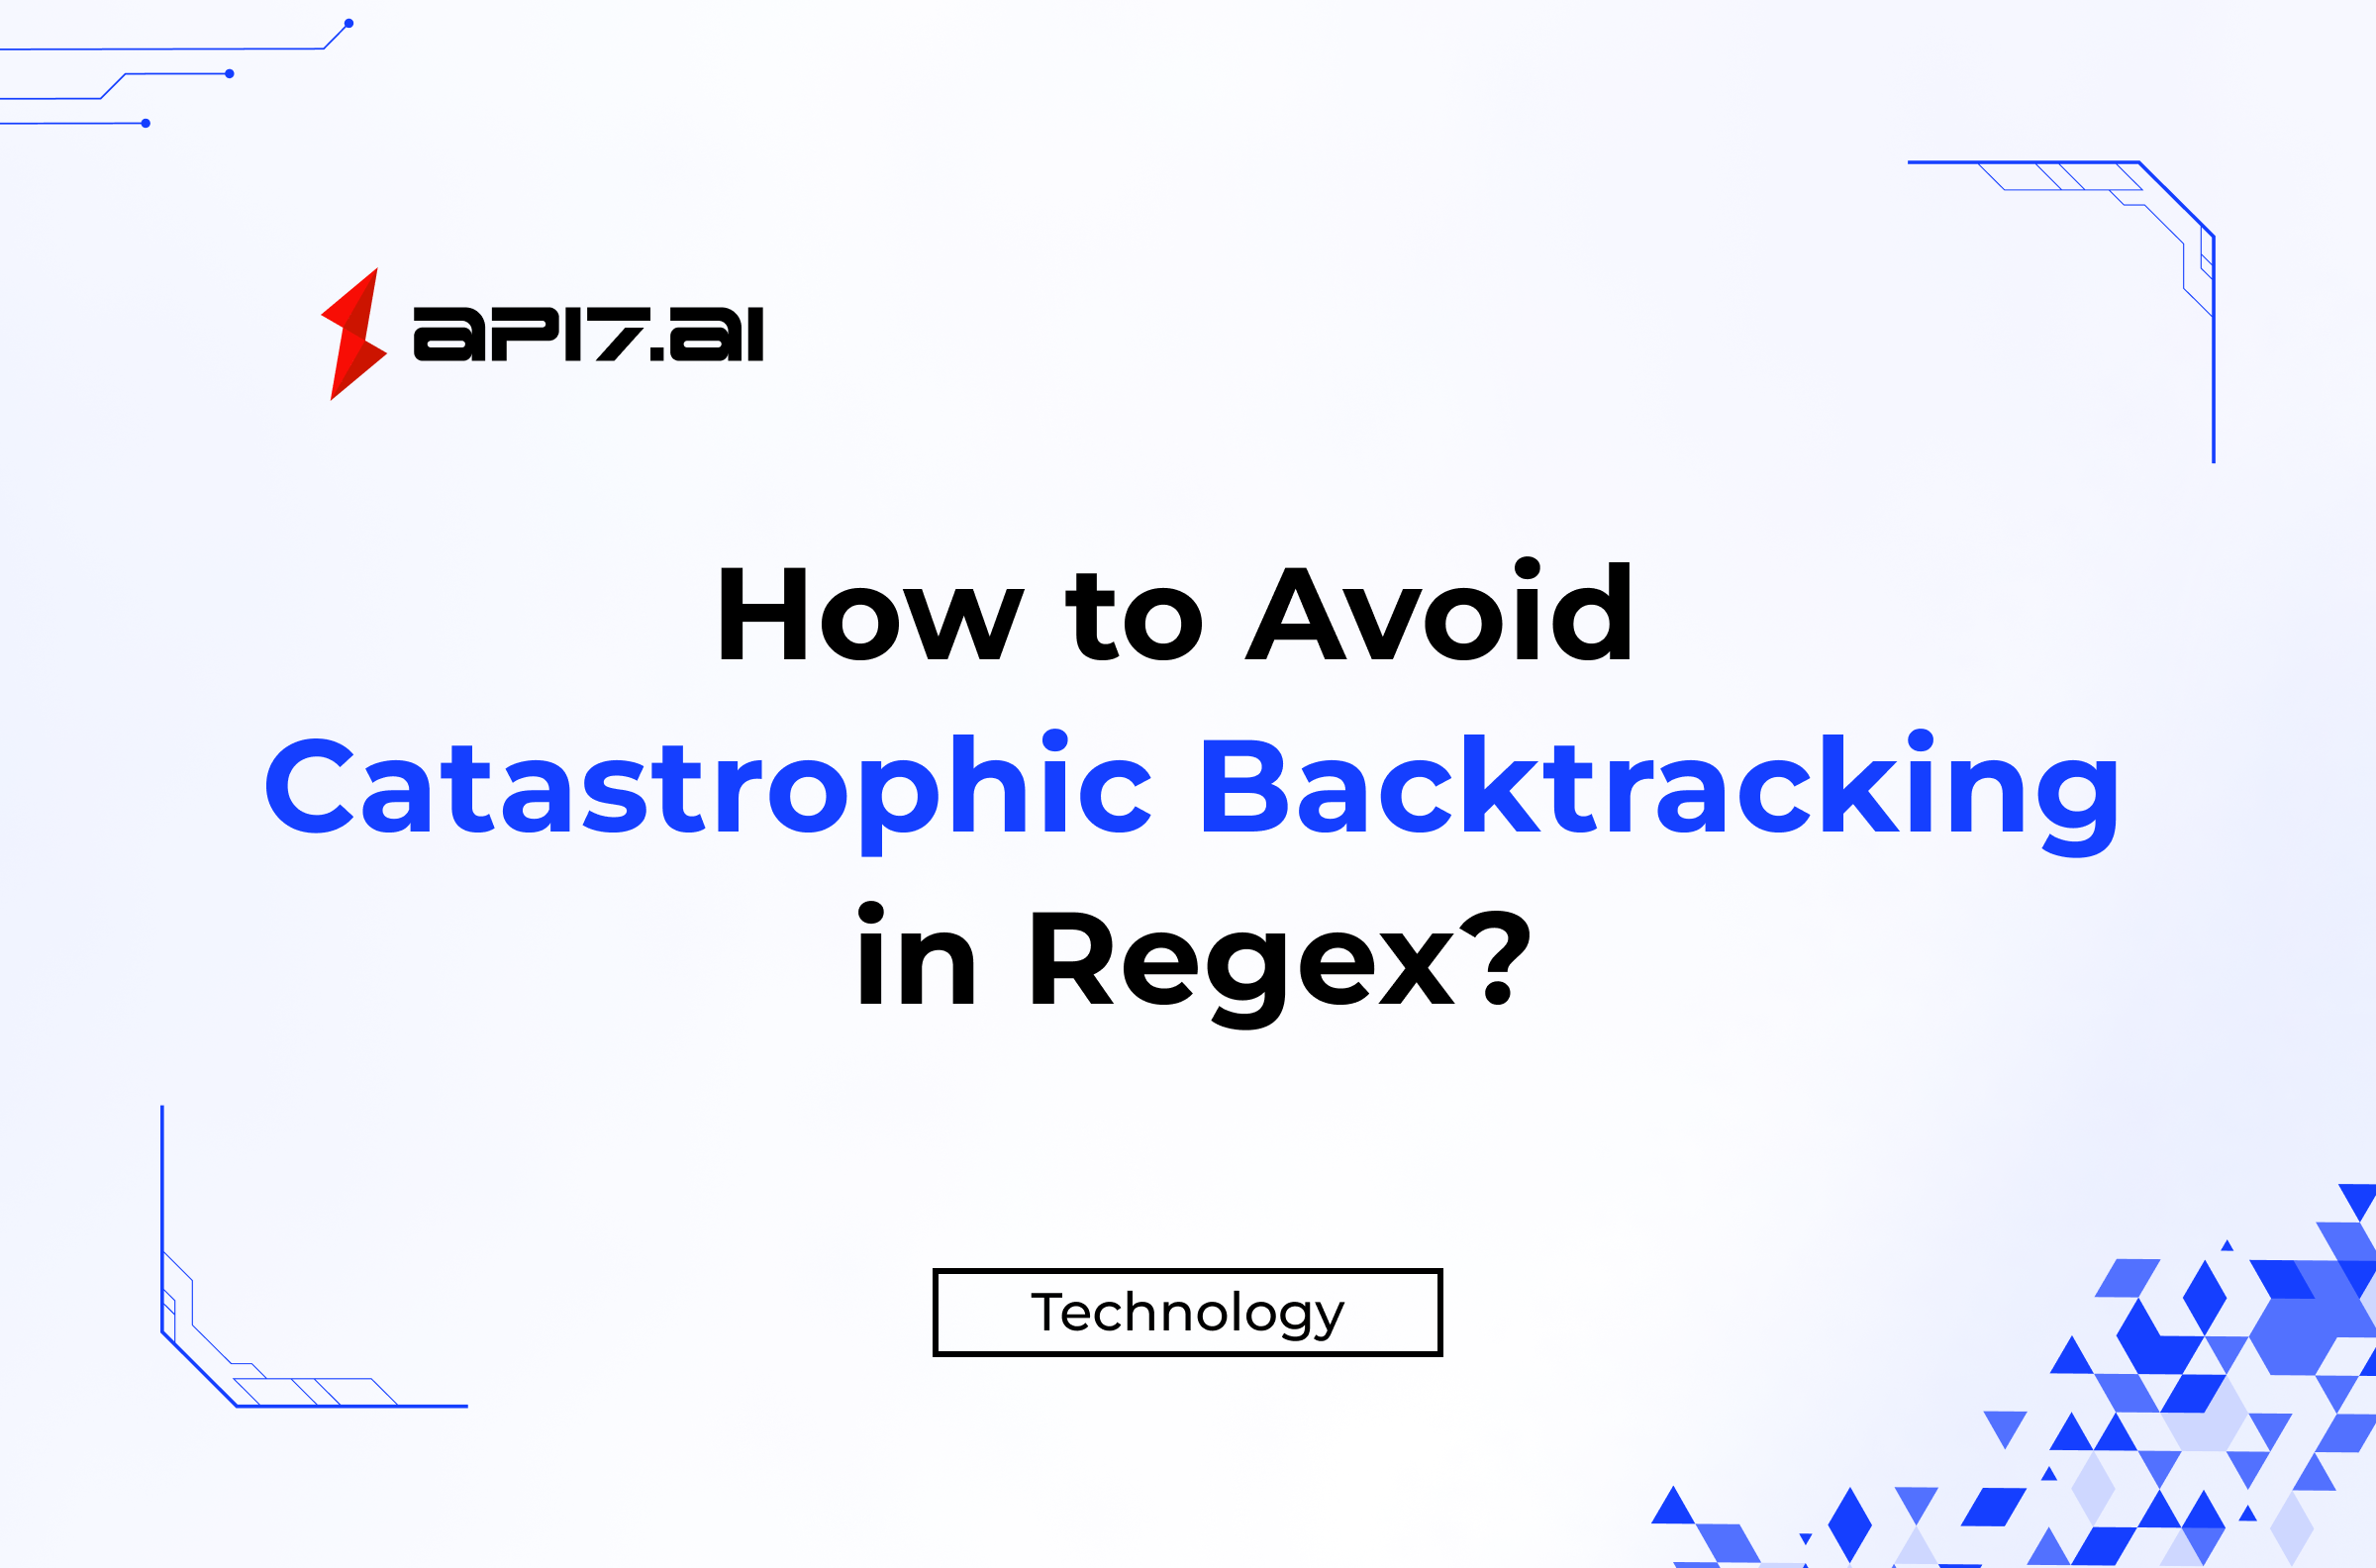 How to Avoid Catastrophic Backtracking in Regex?